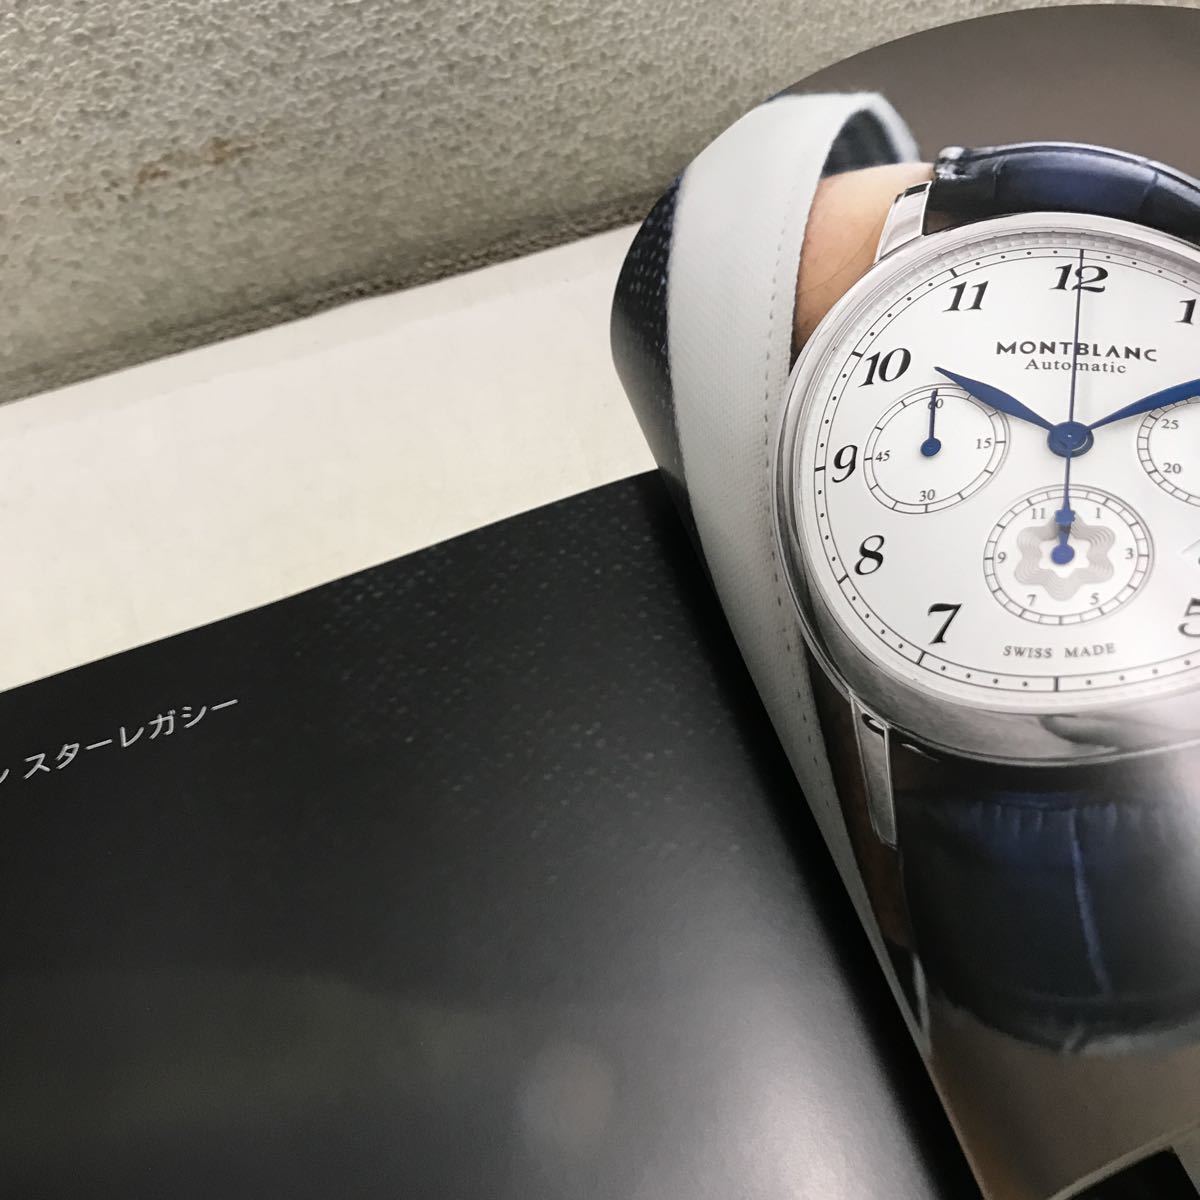 Q05^ MONTBLANK Montblanc Timepieces2018 Novelty clock catalog beautiful book@230301